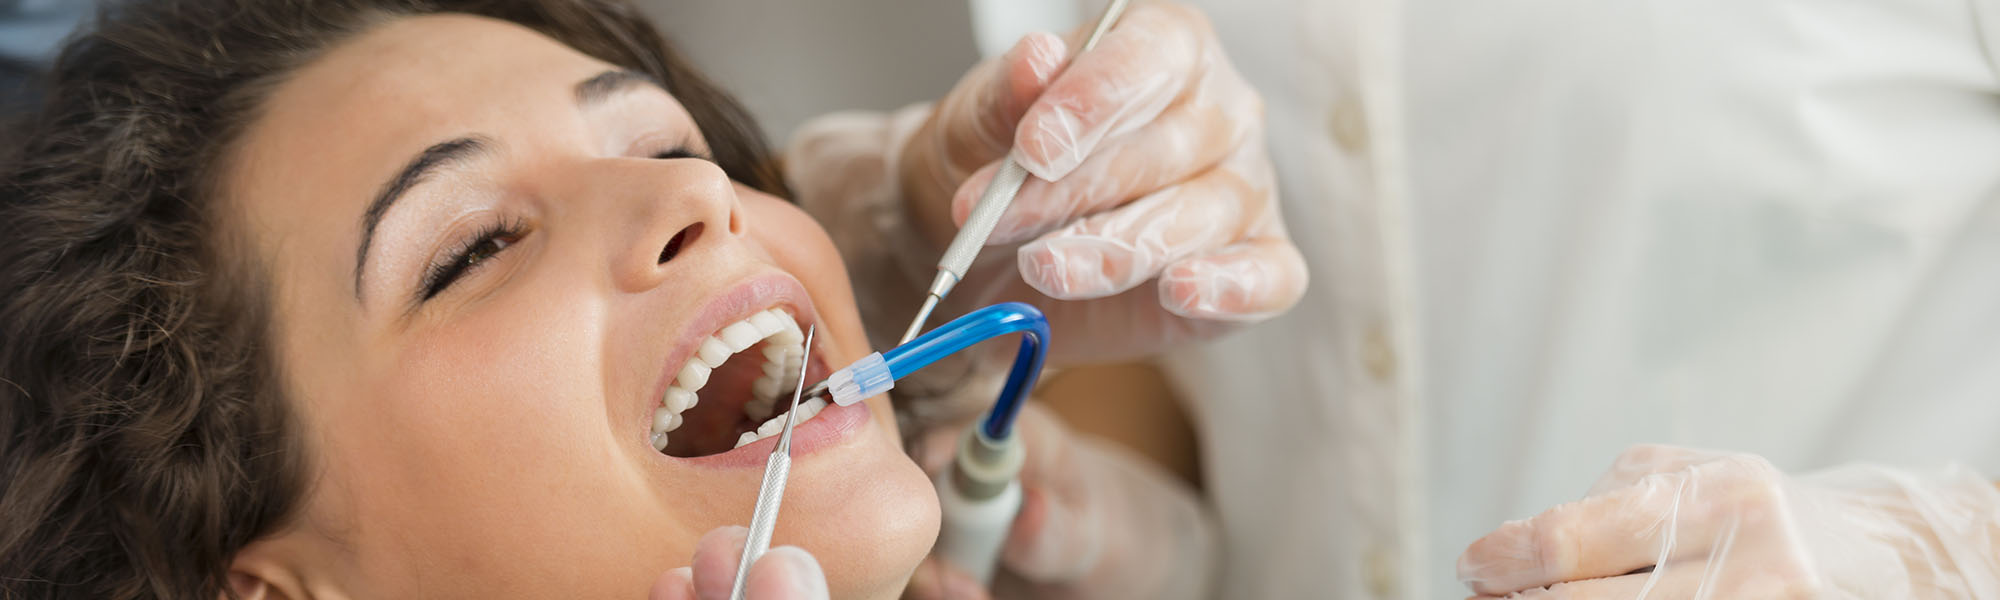 Dental Cleaning Overview